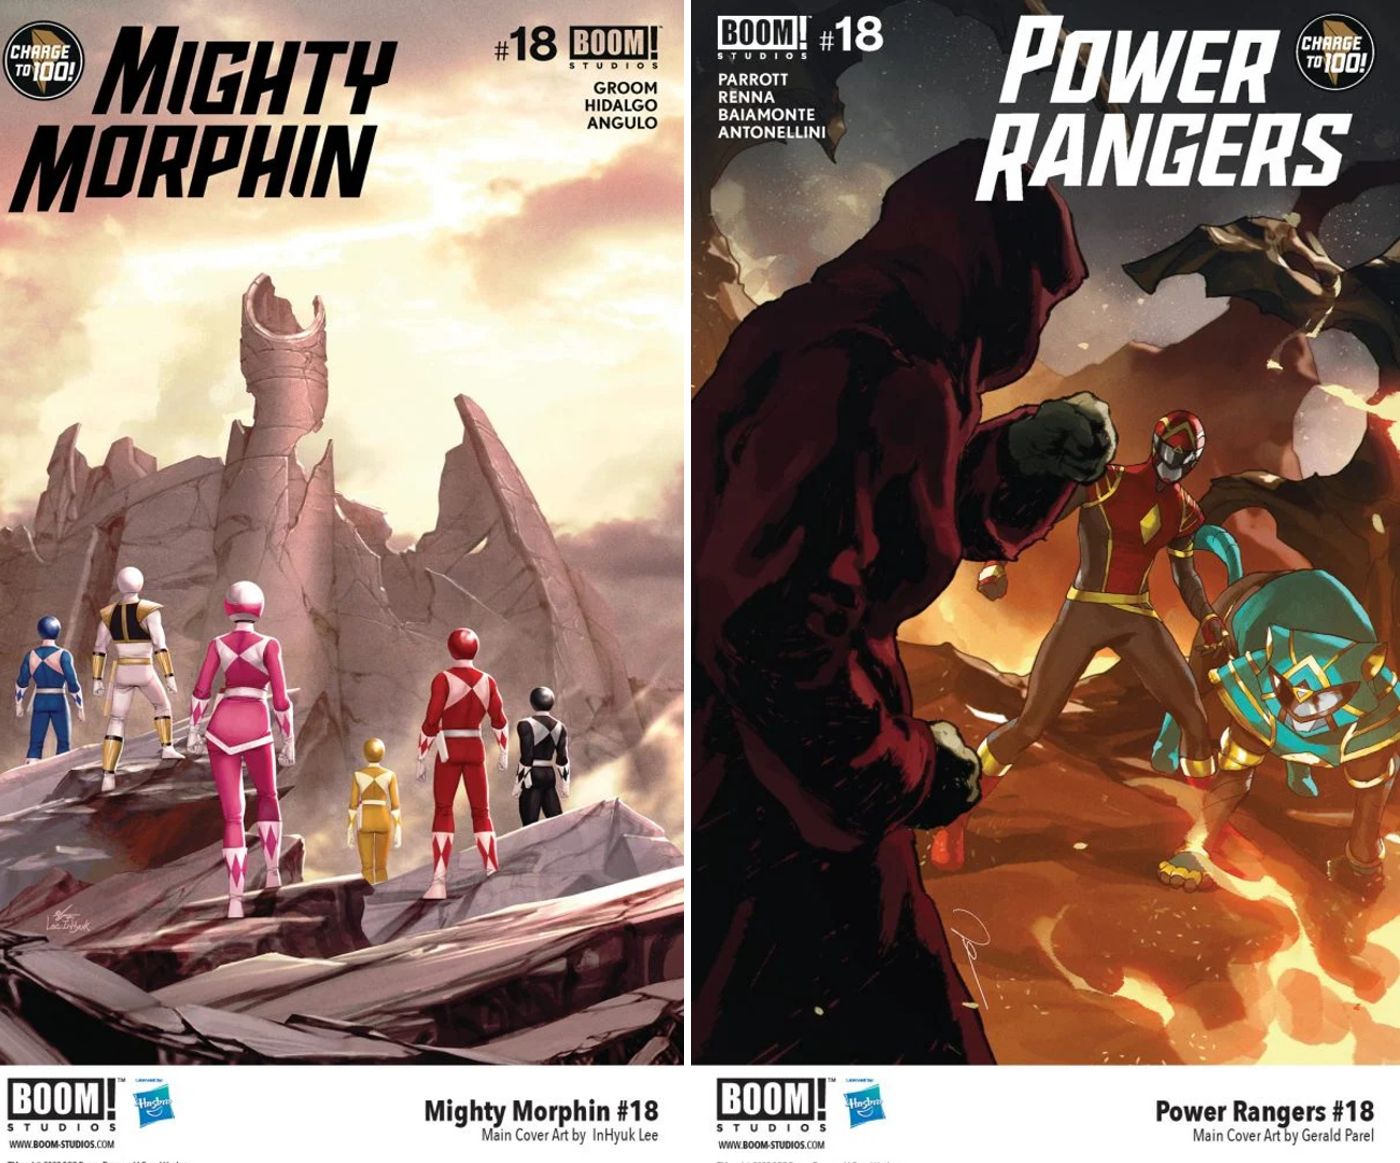 Power Rangers Comics Celebrate 100th Issue with Epic Crossover Event